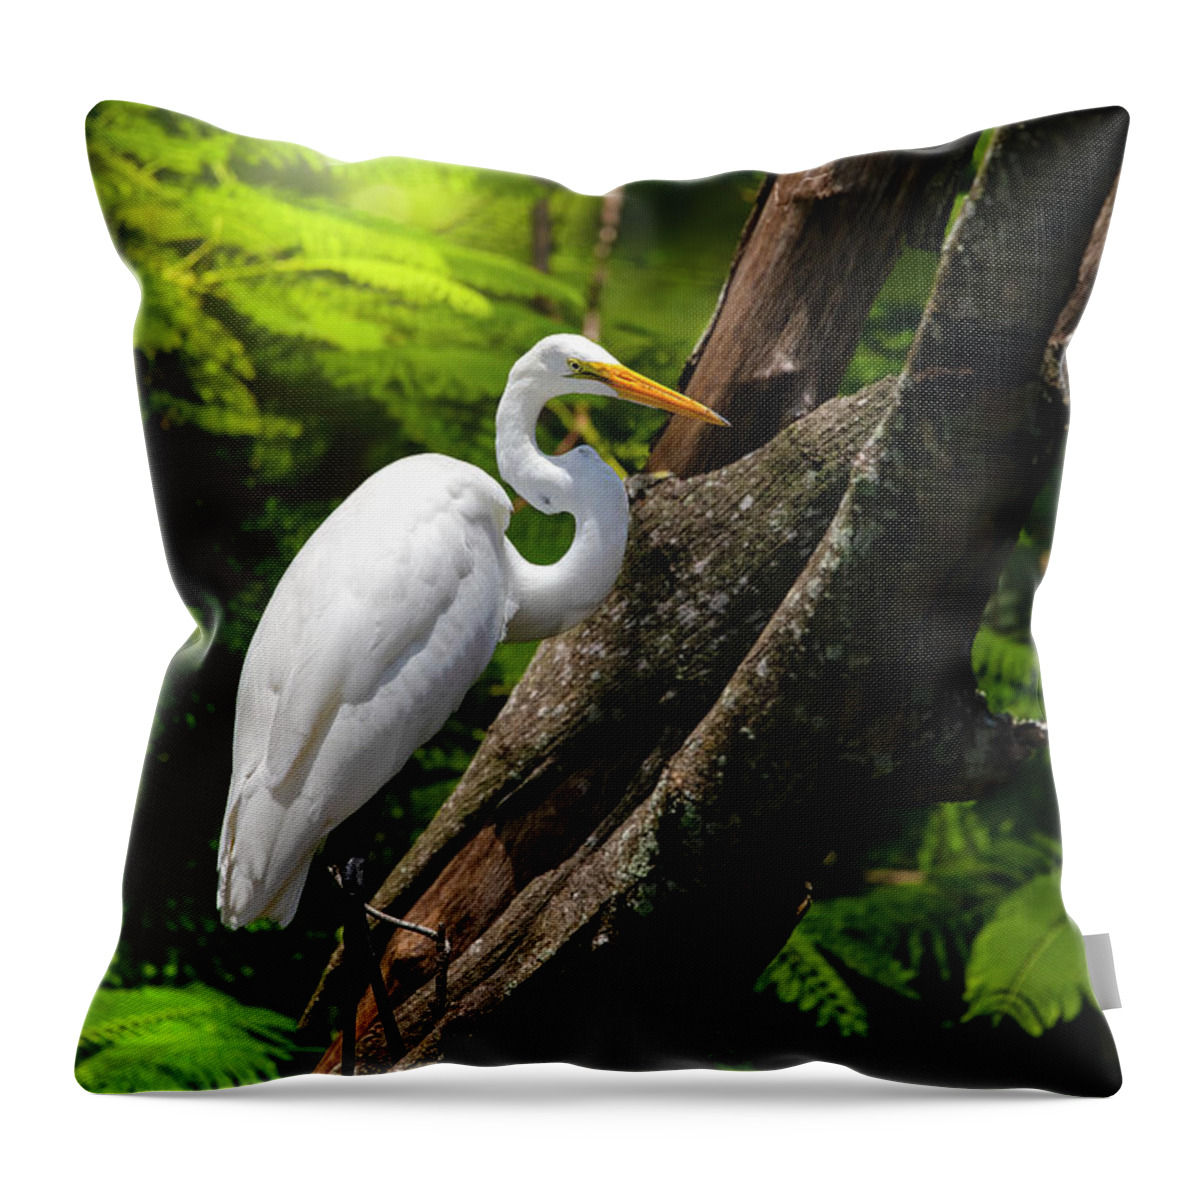 Great White Egret Throw Pillow featuring the photograph The Elegant Great White Egret by Mark Andrew Thomas